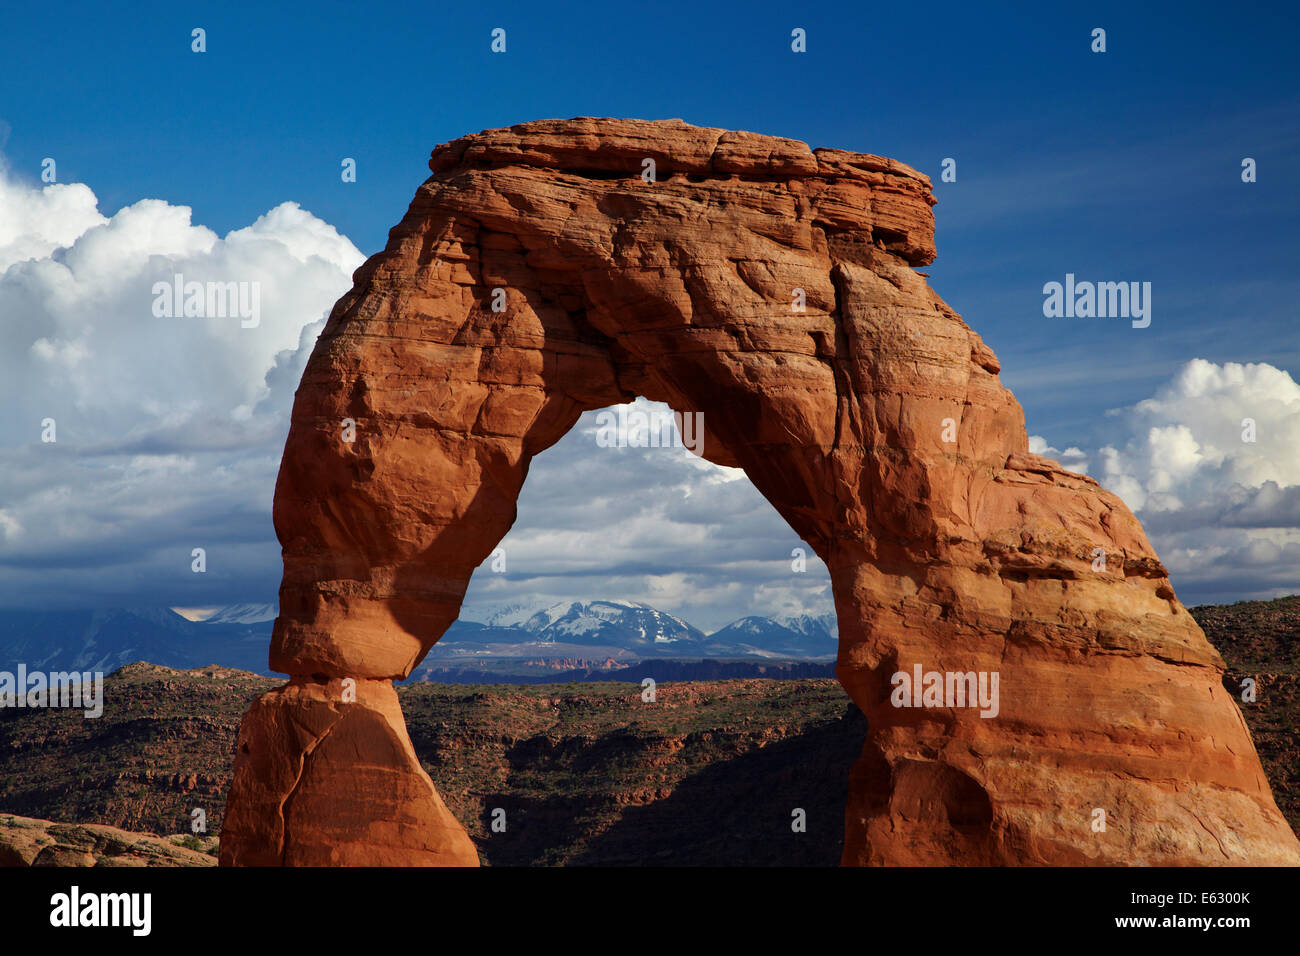 Delicate Arch (65 ft / 20 m tall iconic landmark of Utah), Arches National Park, and La Sal Mountains, near Moab, Utah, USA Stock Photo